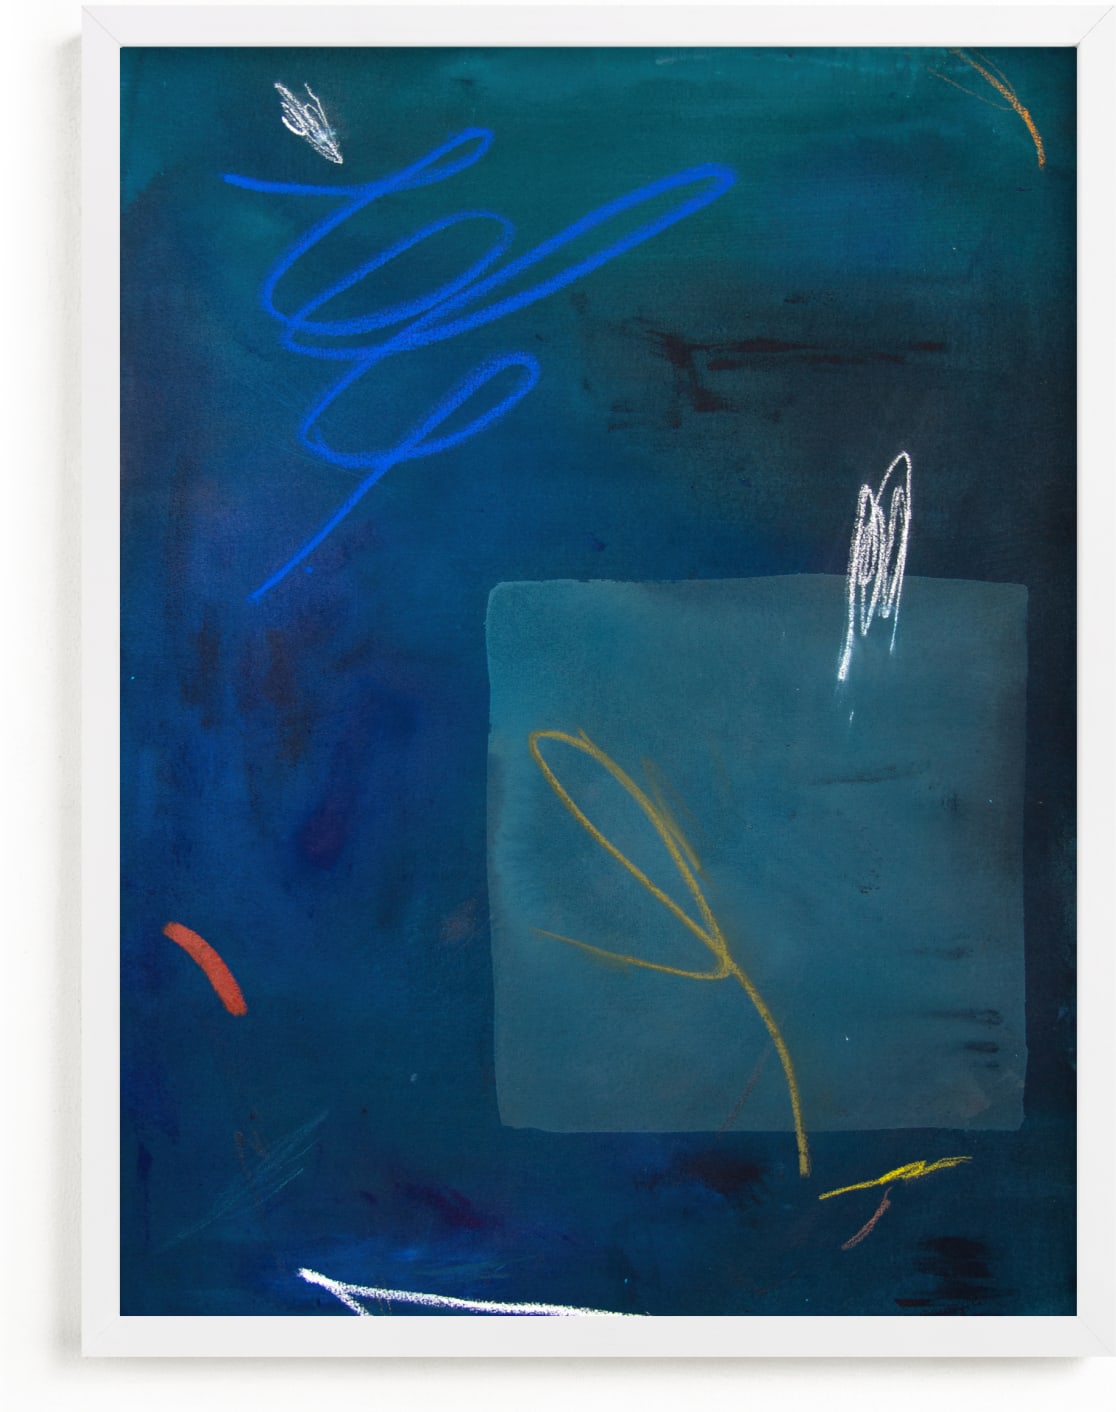 This is a blue, colorful art by Keren Toledano called BAIT & SWITCH.